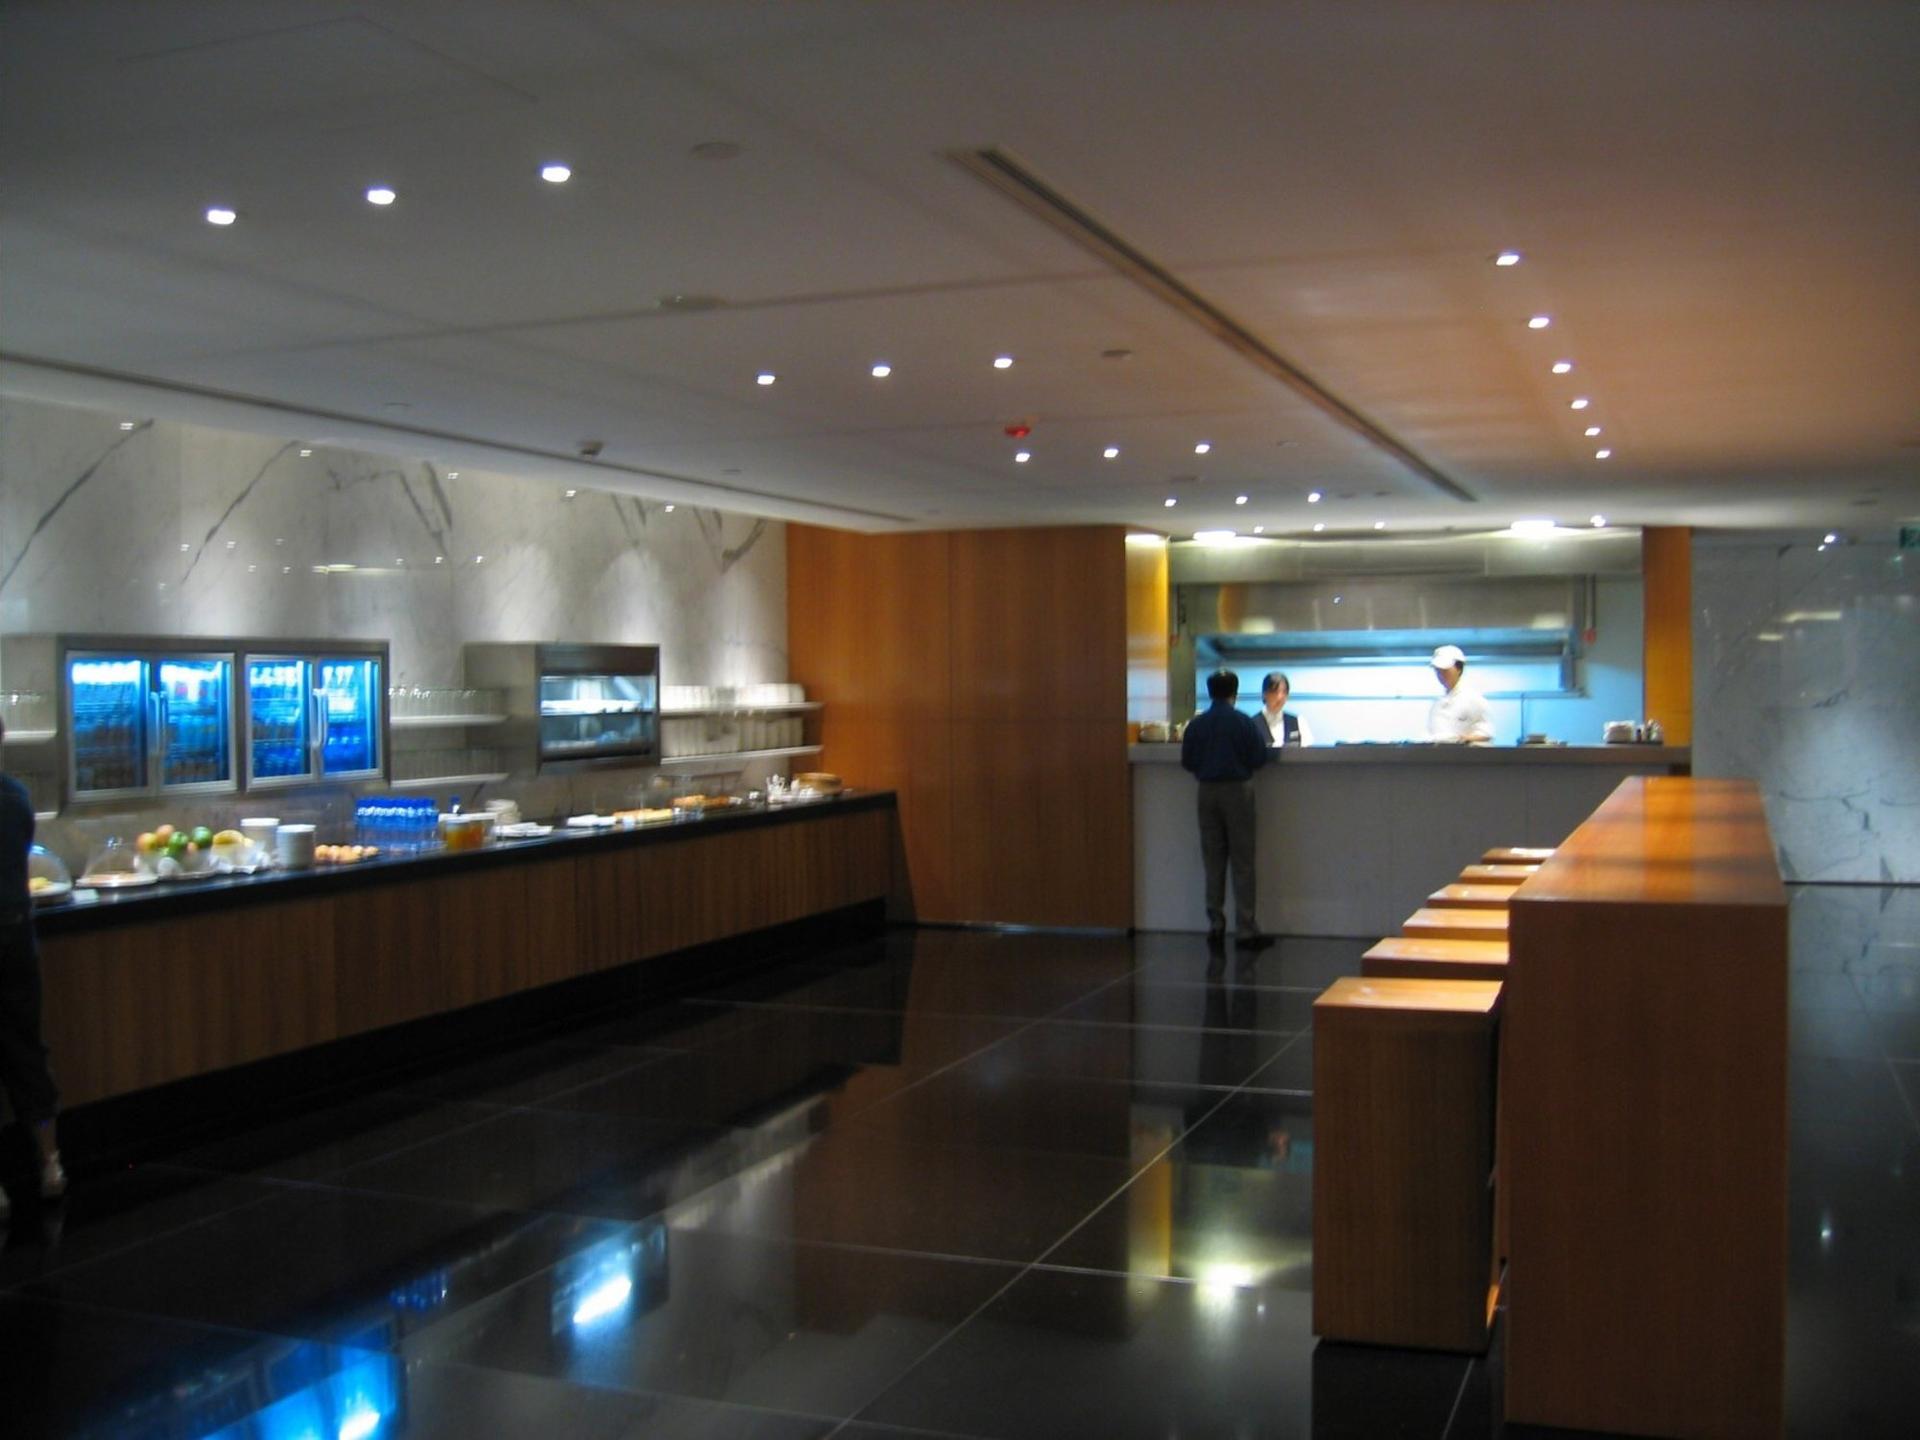 Cathay Pacific The Wing Business Class Lounge image 11 of 55